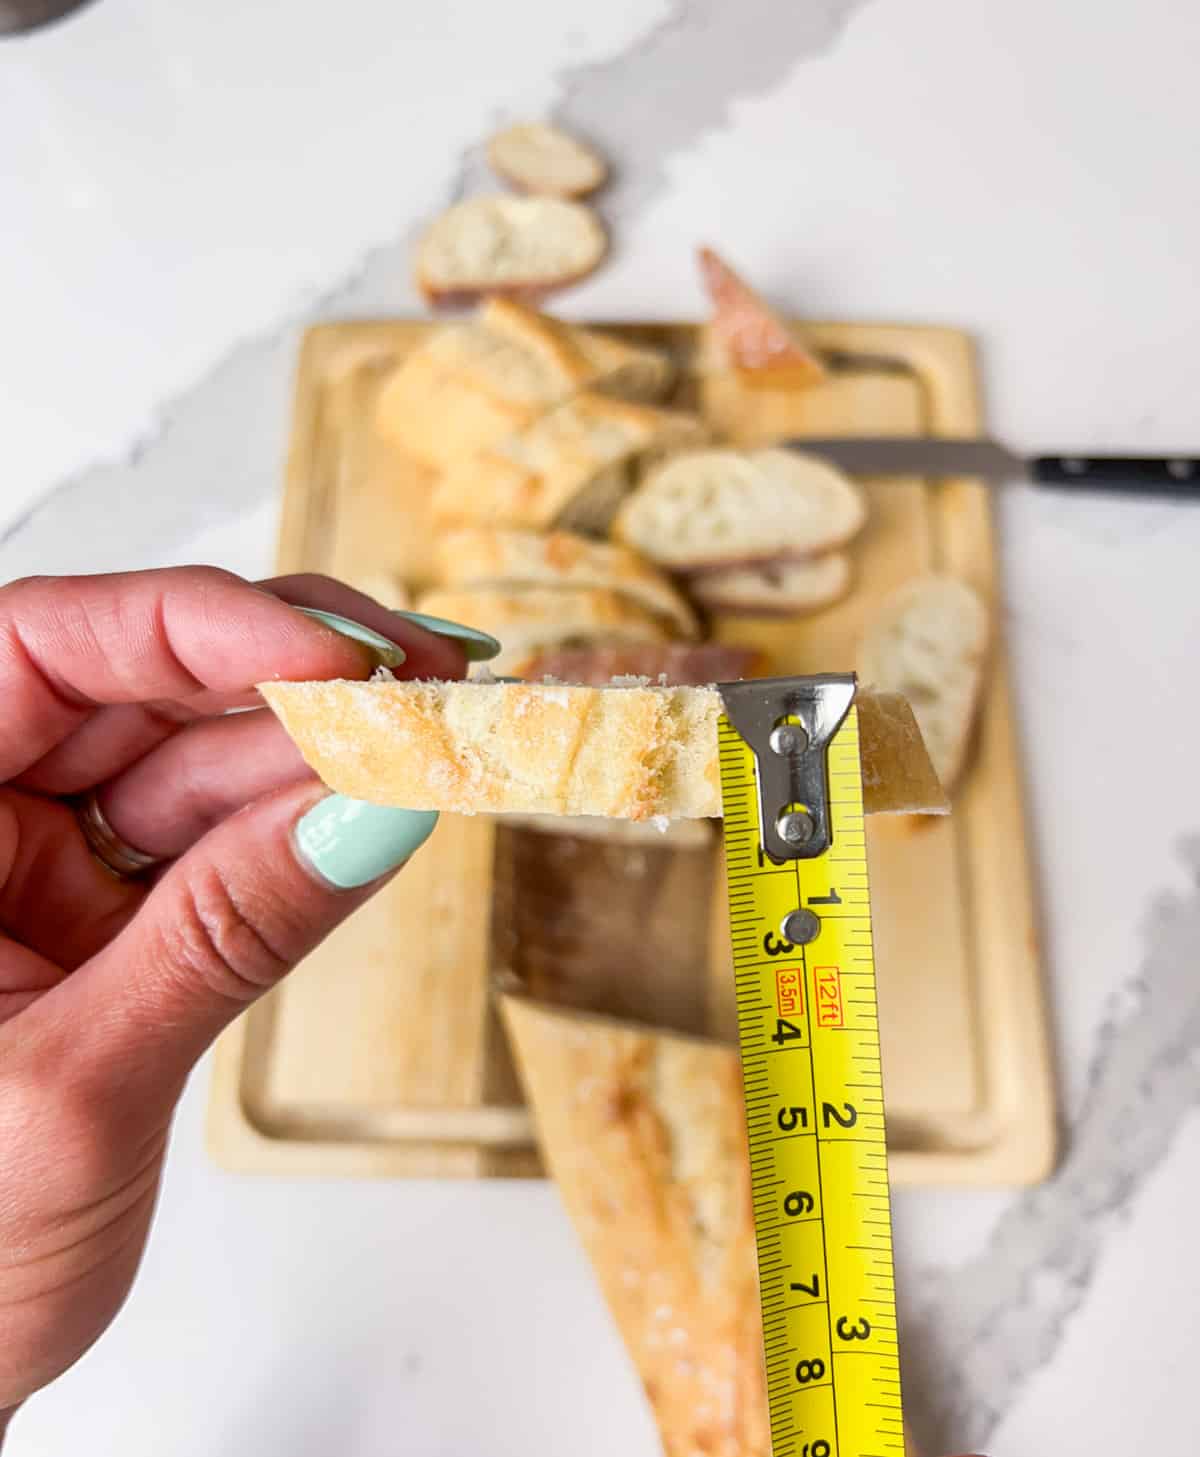 Showing how thick your crostini should be with a measuring tape.